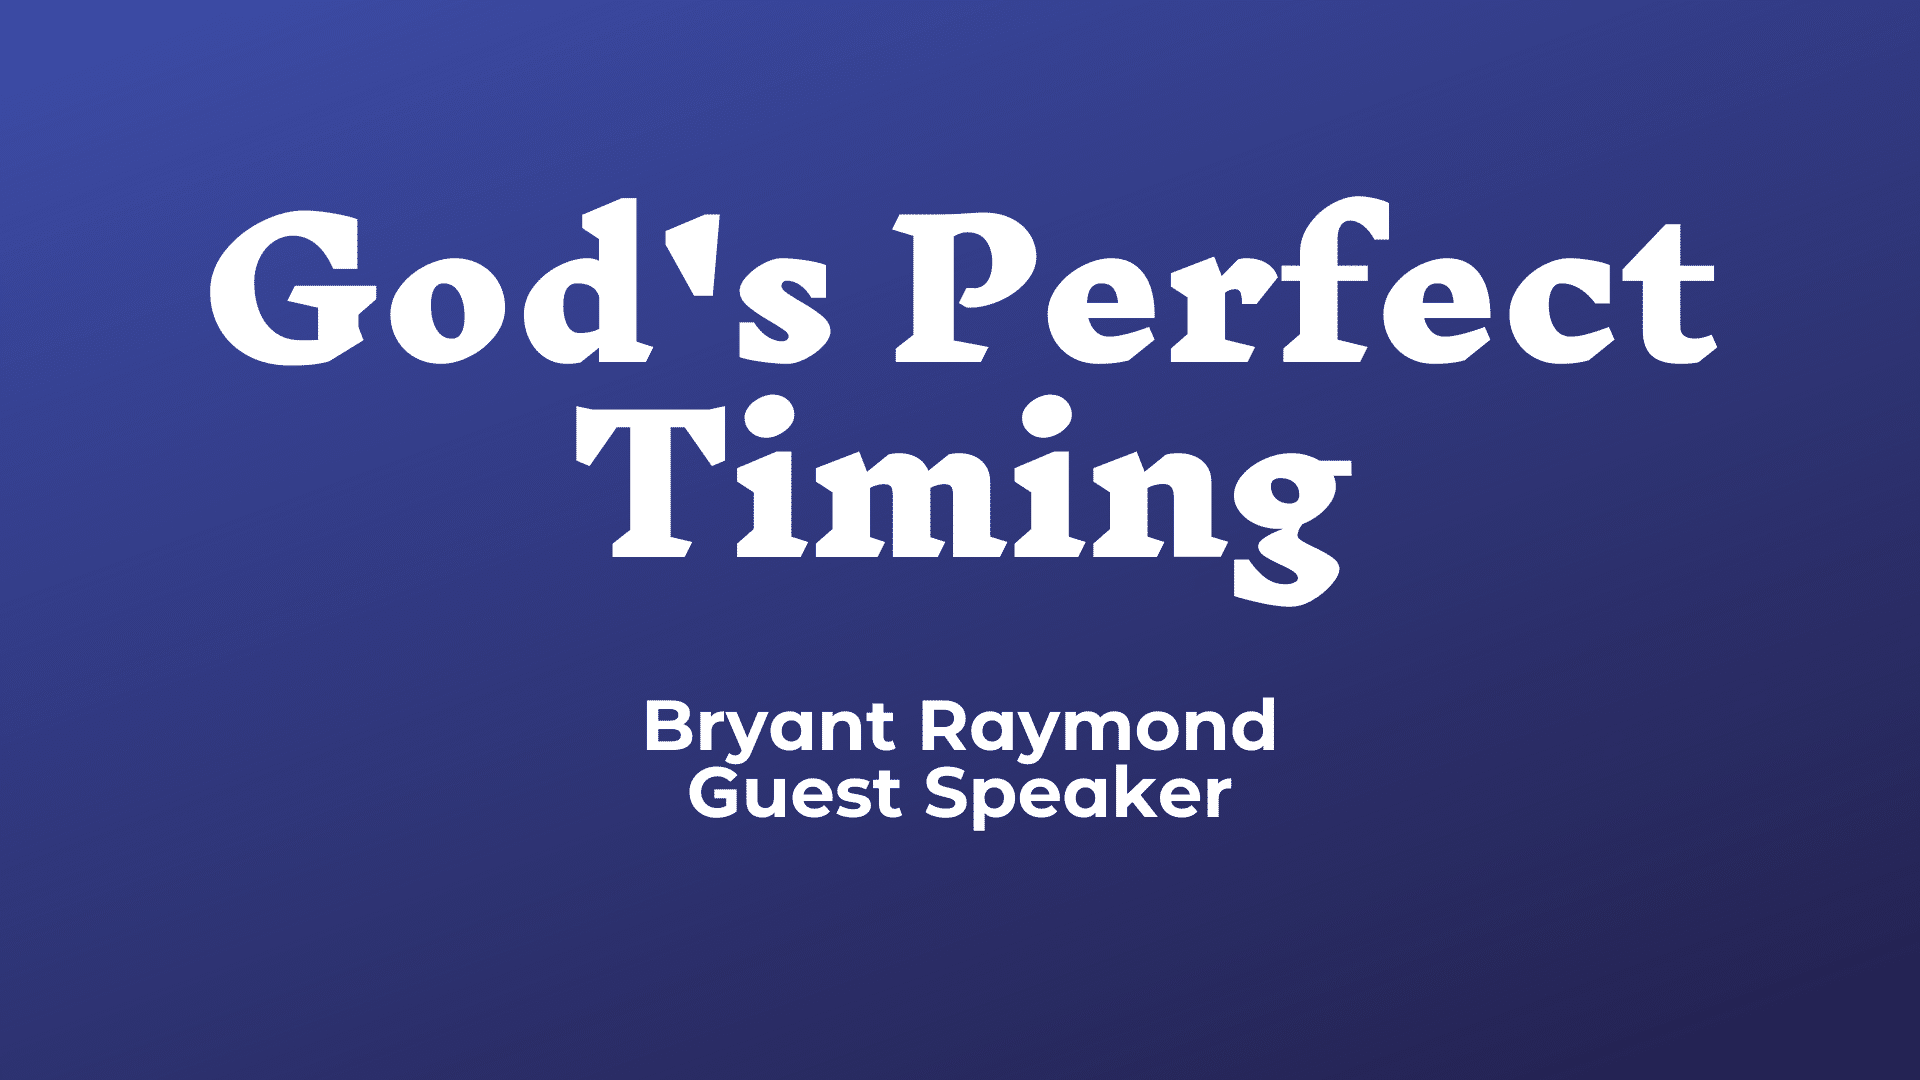 God’s Perfect Timing